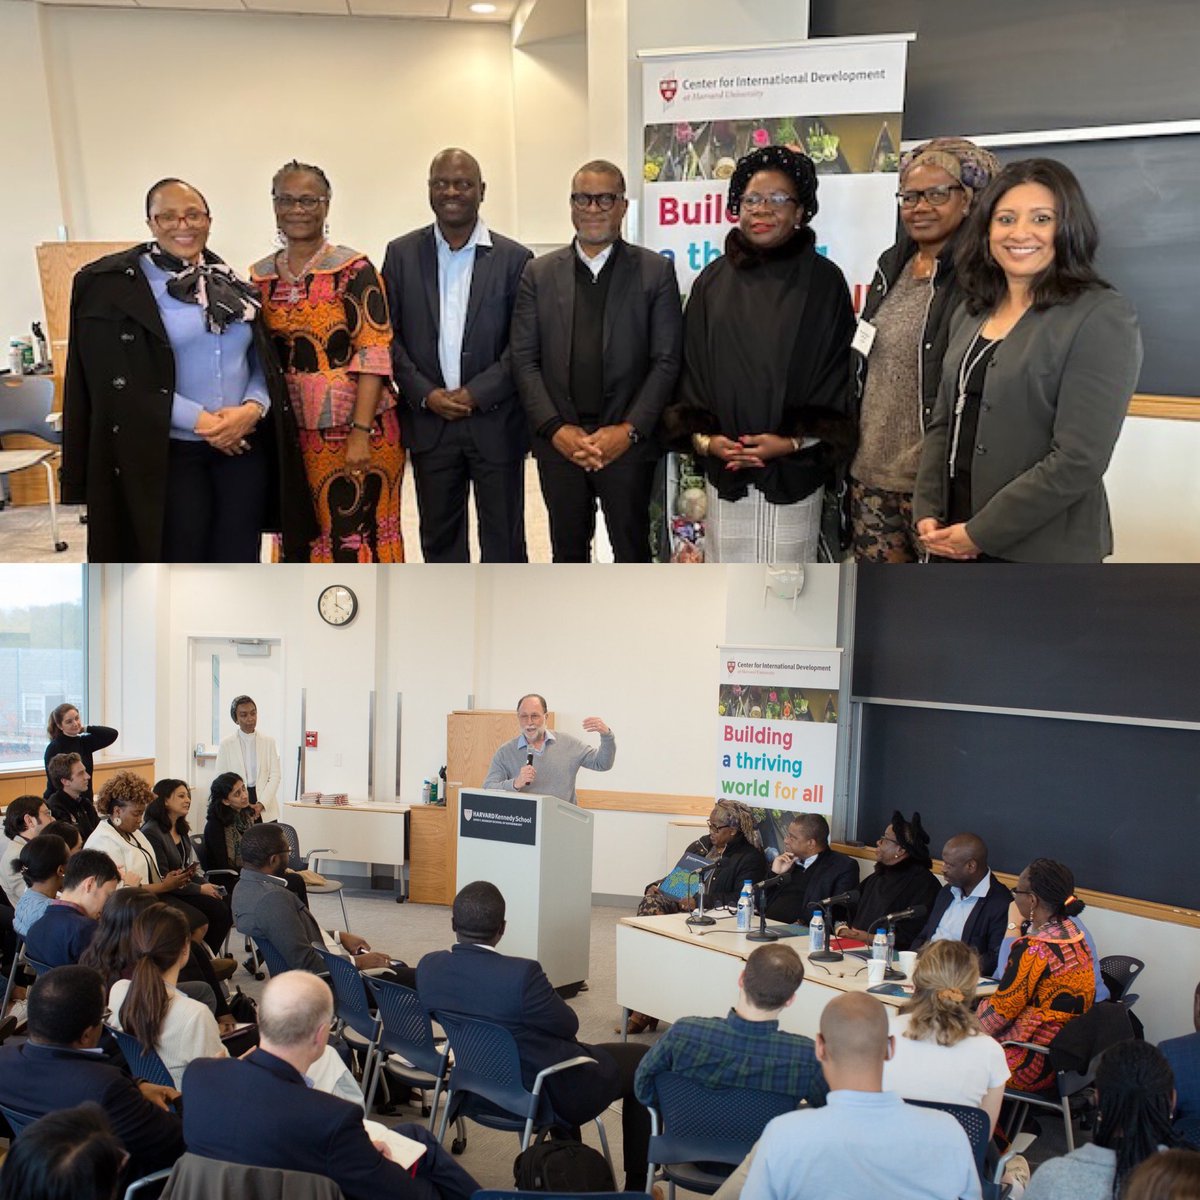 CID’s @GlobalFatema @ricardo_hausman host a panel discussion on economic growth in #Africa w/ current and/or former Finance Ministers from #Mozambique 🇲🇿 #TheGambia 🇬🇲 #Namibia 🇳🇦 #Lesotho 🇱🇸 #BurkinaFaso 🇧🇫